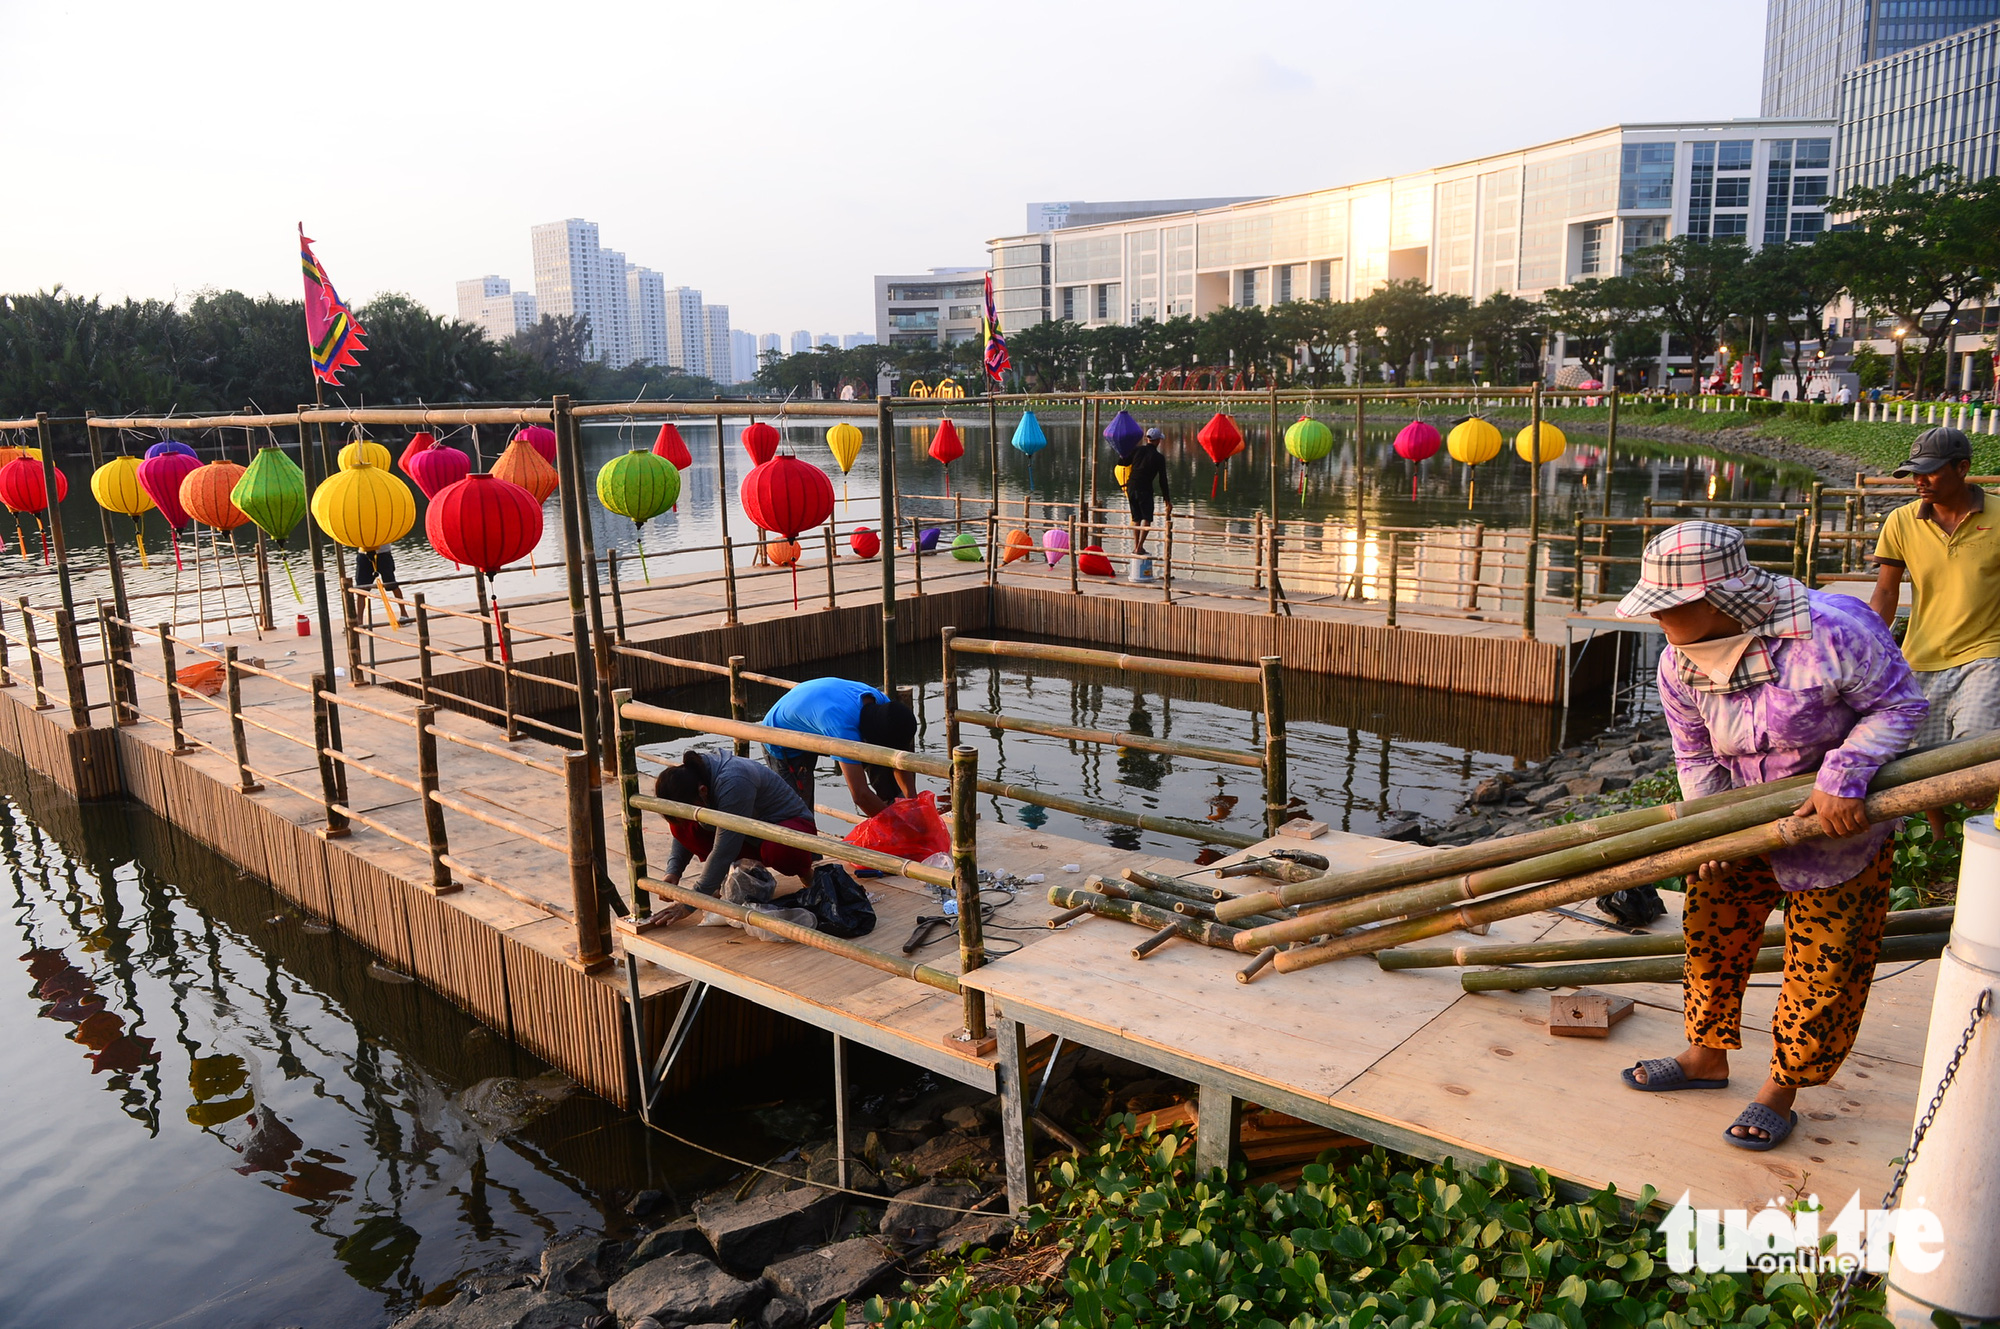 Workers complete a lantern wharf where visitors can express their expectations and dreams in the first days of the new lunar new year through lanterns. Photo: Quang Dinh / Tuoi Tre